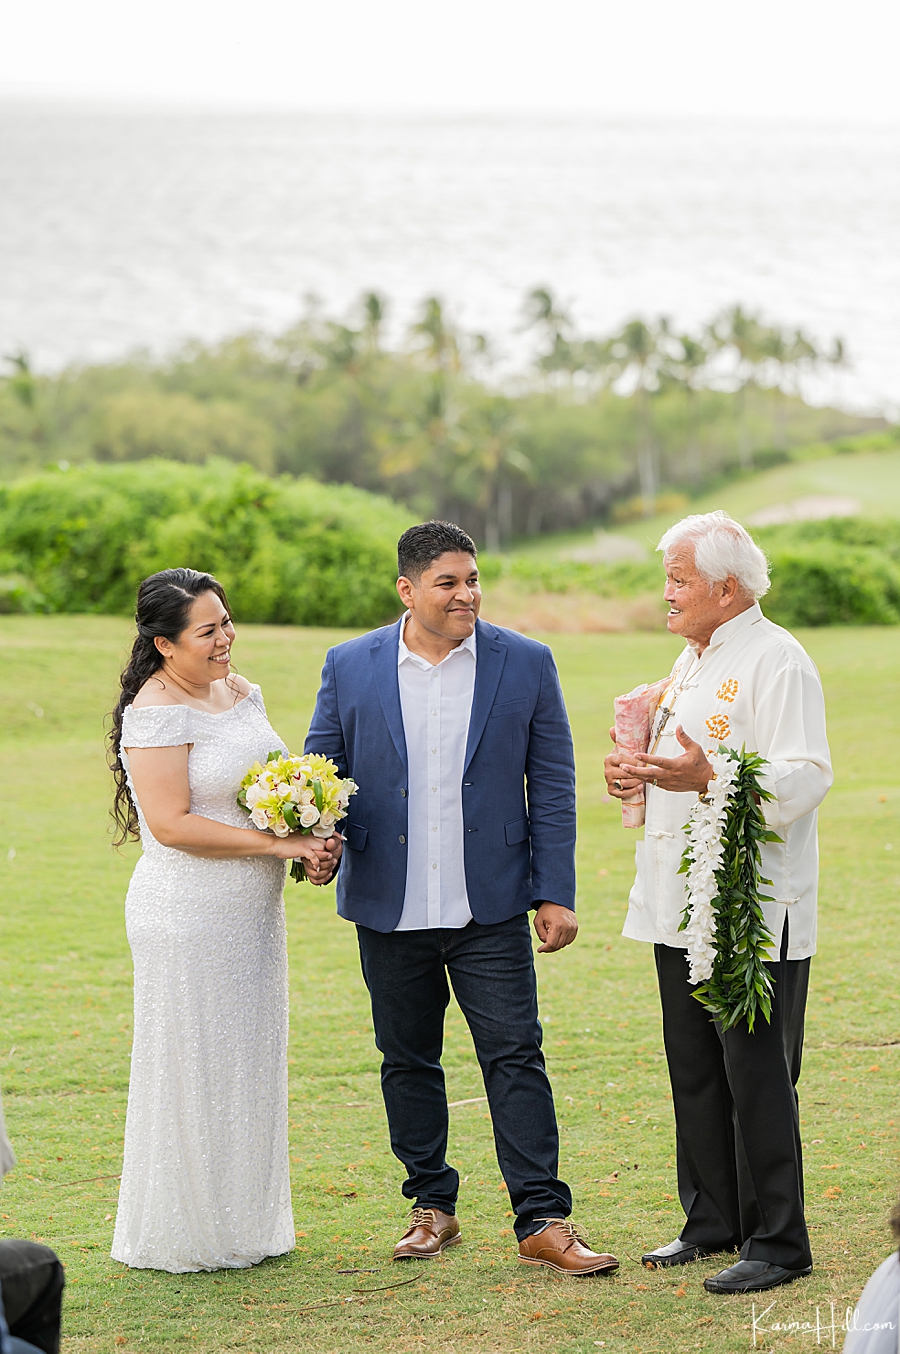 Maui ministers and Officiants